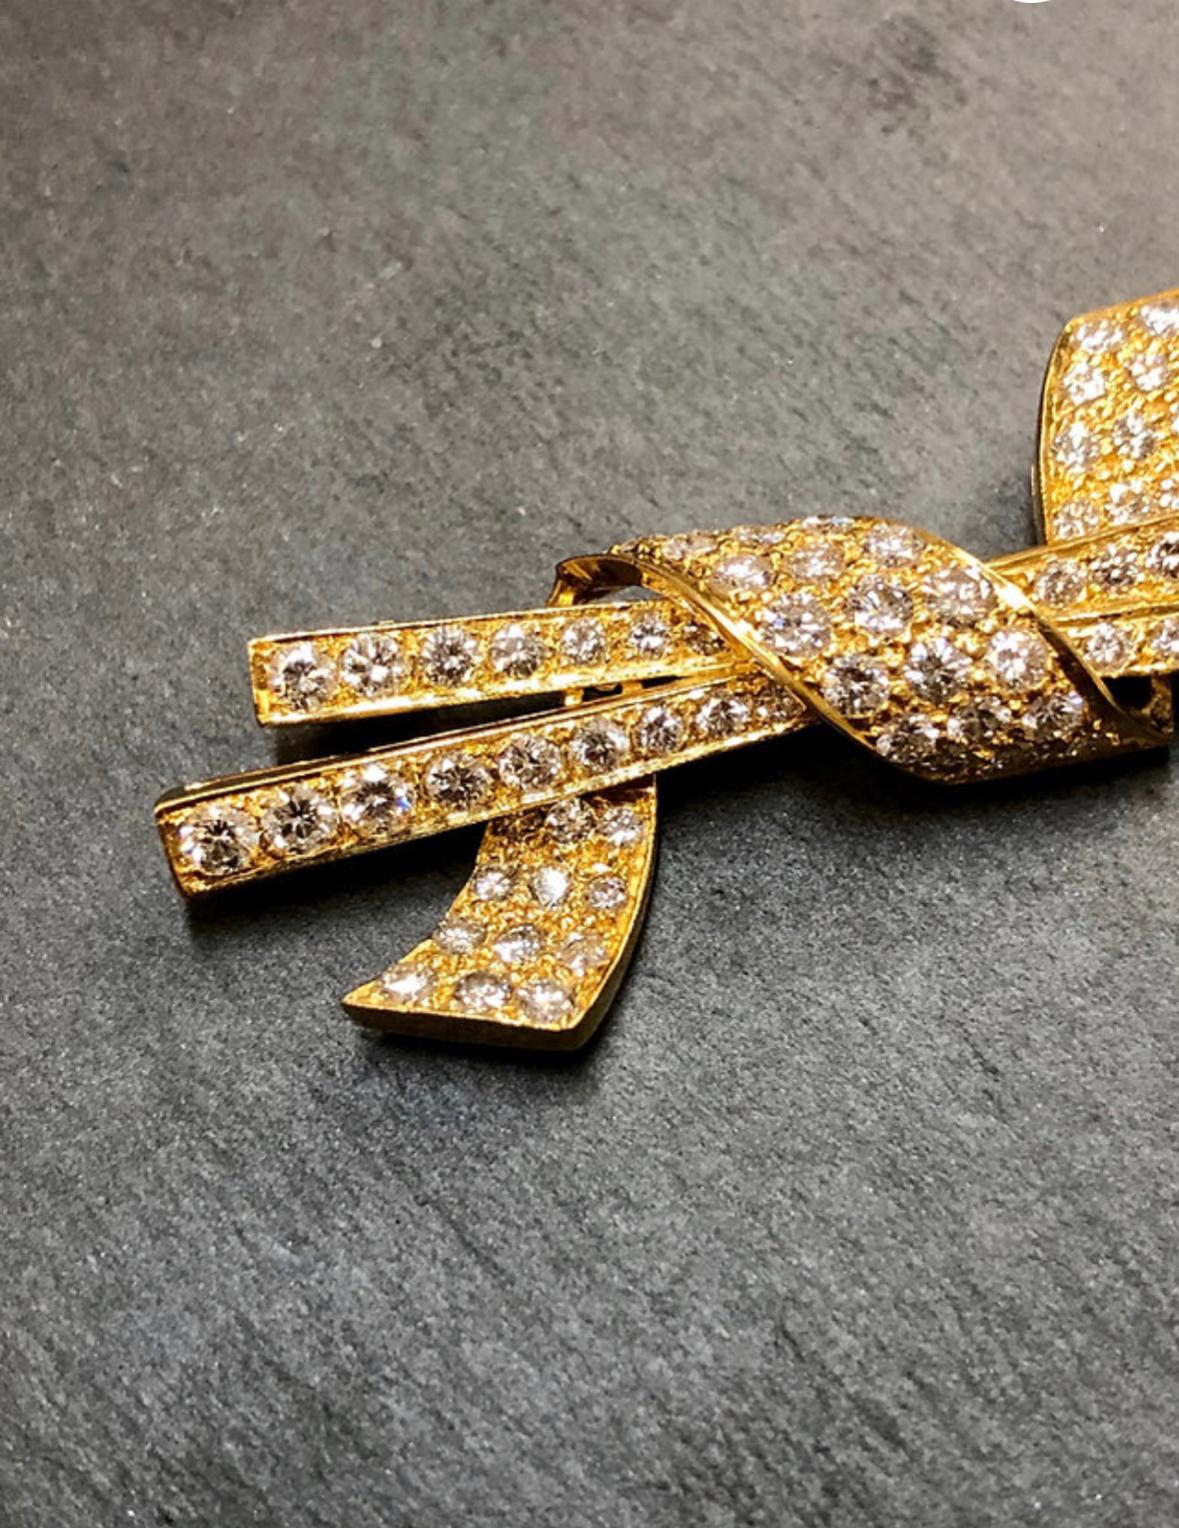 A beautifully made brooch done in 18K and set with approximately 3.40cttw in F-G color and Vs1 clarity round diamonds. Down to the azuring in the back, no expense was spared in the production of this wonderful piece.

Dimensions/Weight
2 1/4” long